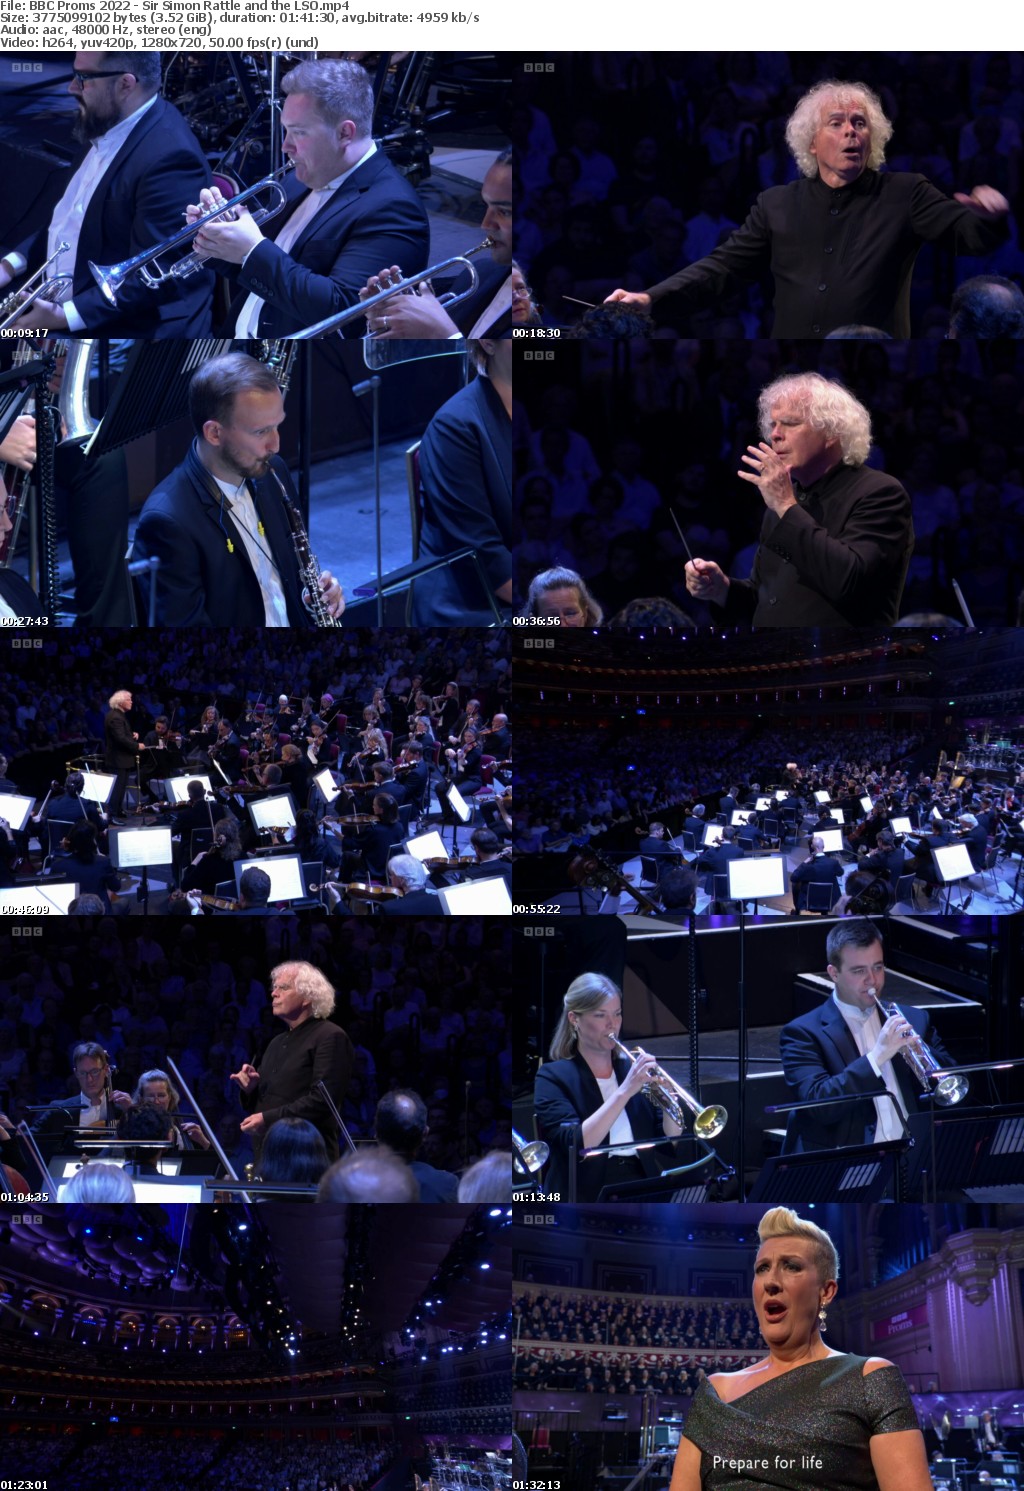 BBC Proms 2022 - Sir Simon Rattle and the LSO (1280x720p HD, 50fps, soft Eng subs)